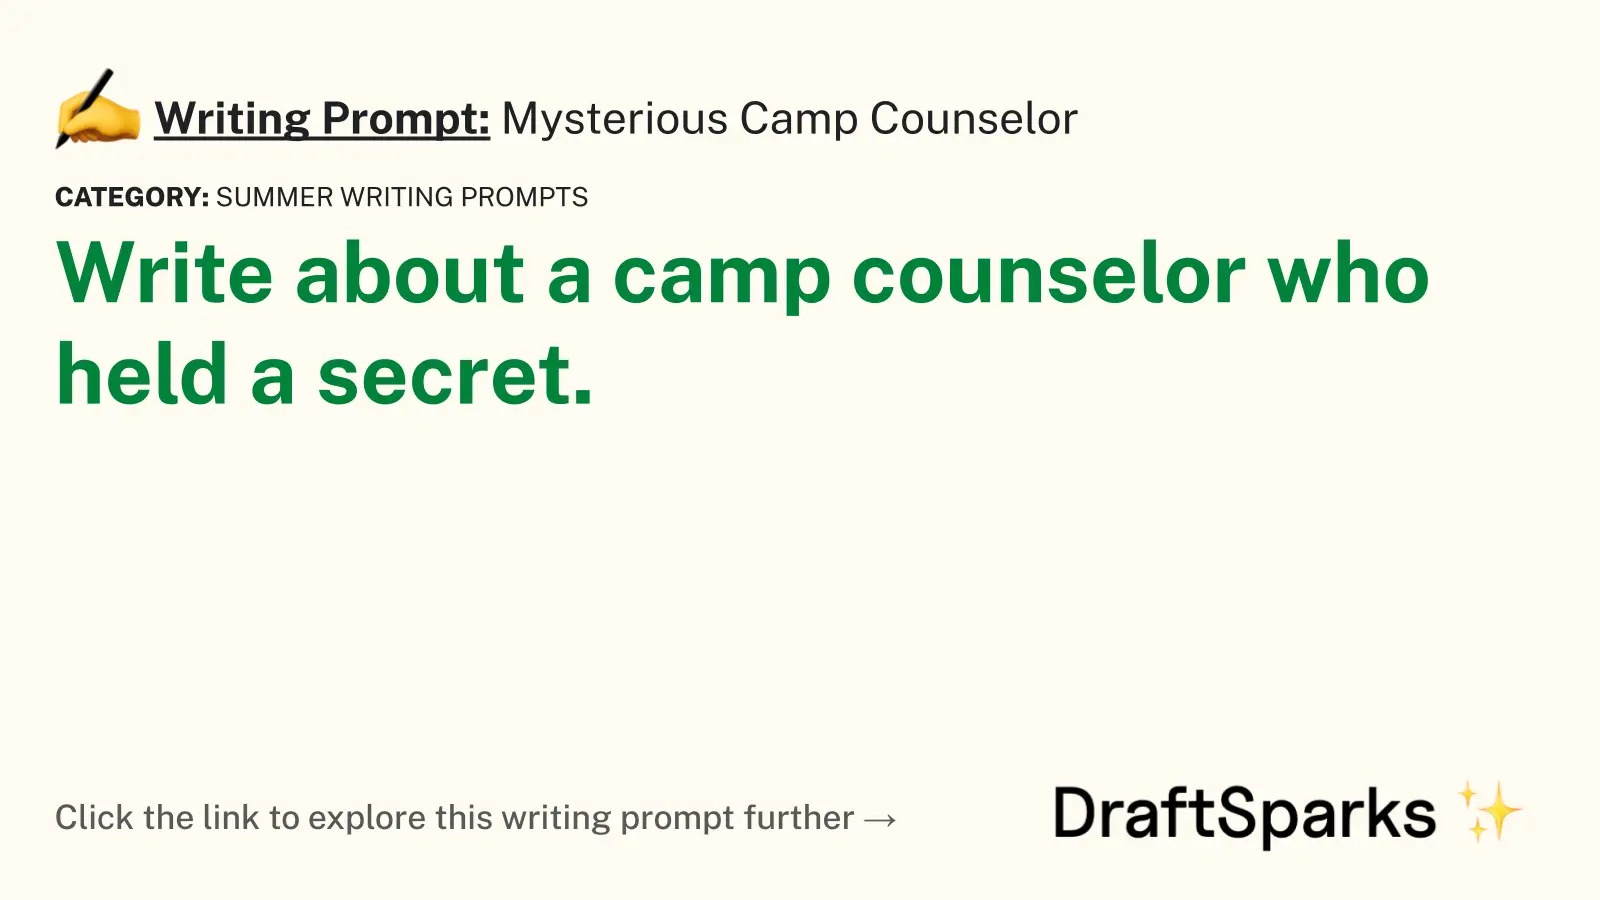 Mysterious Camp Counselor